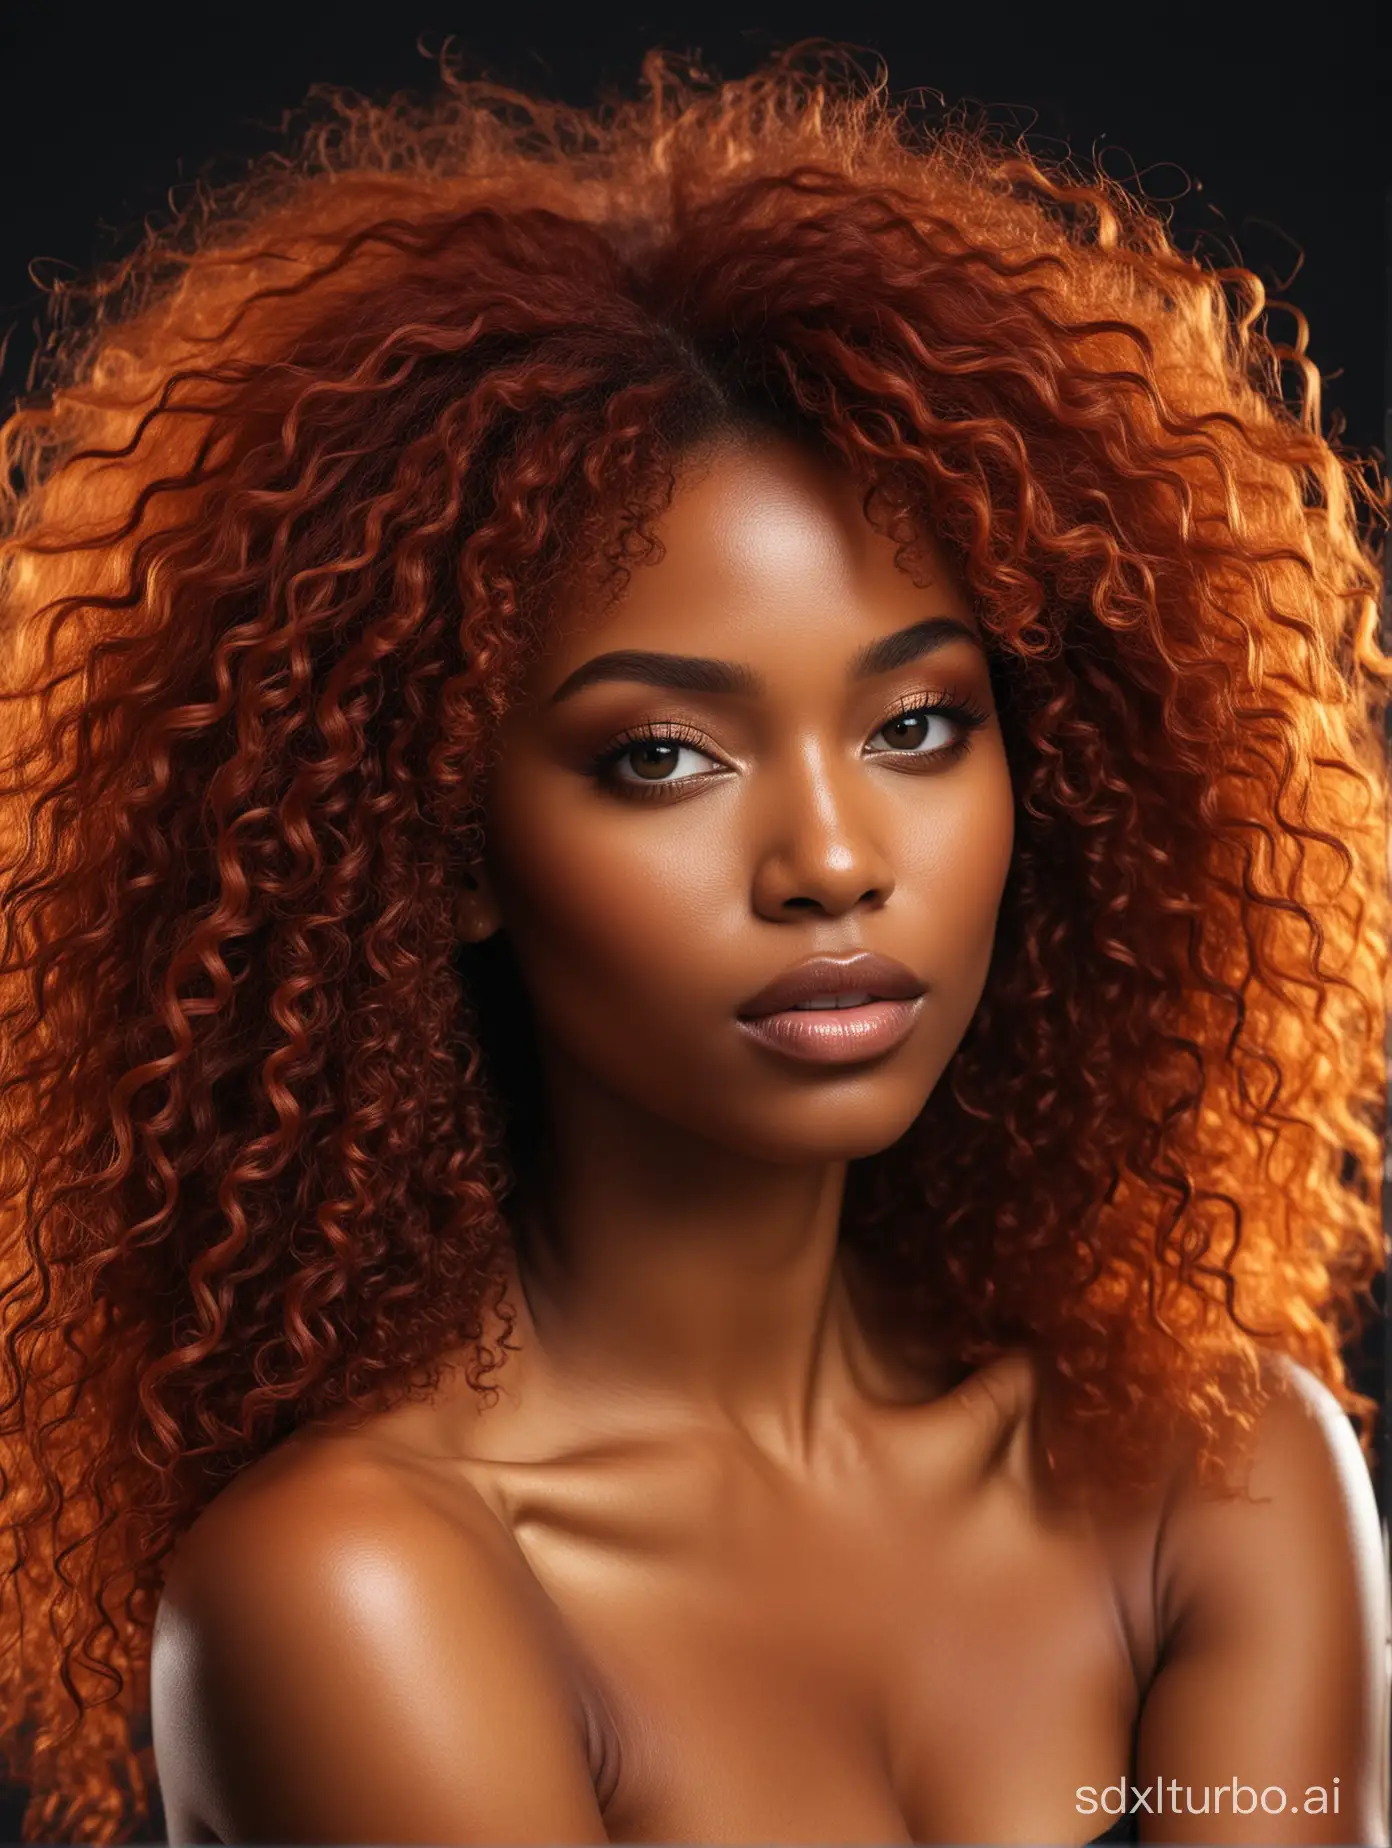 Black beautiful woman, frizzy red hair, flame body. Ember skin.